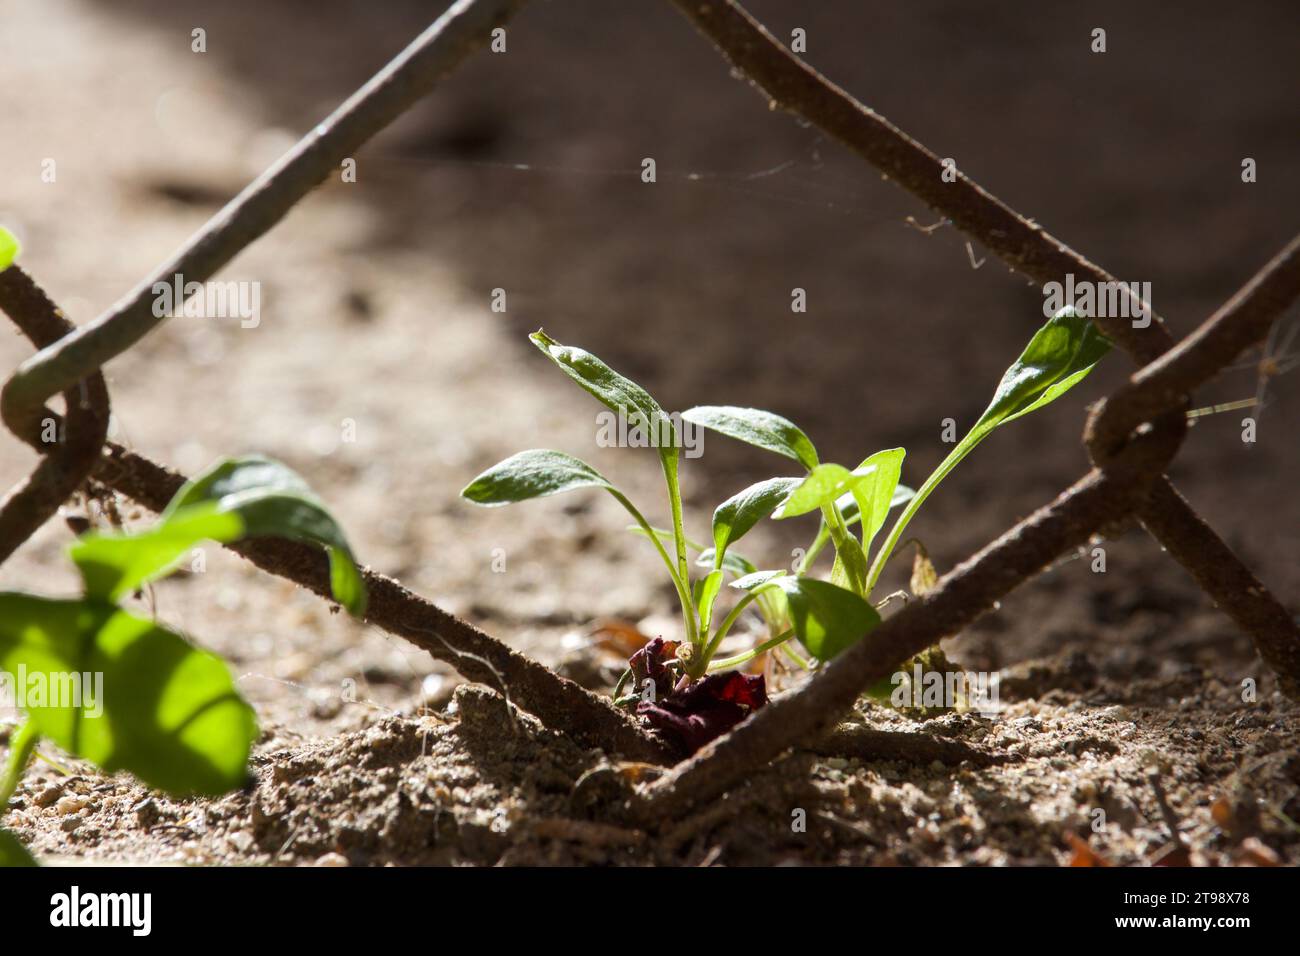 Plant growing in soil near rusty fence. Stock Photo